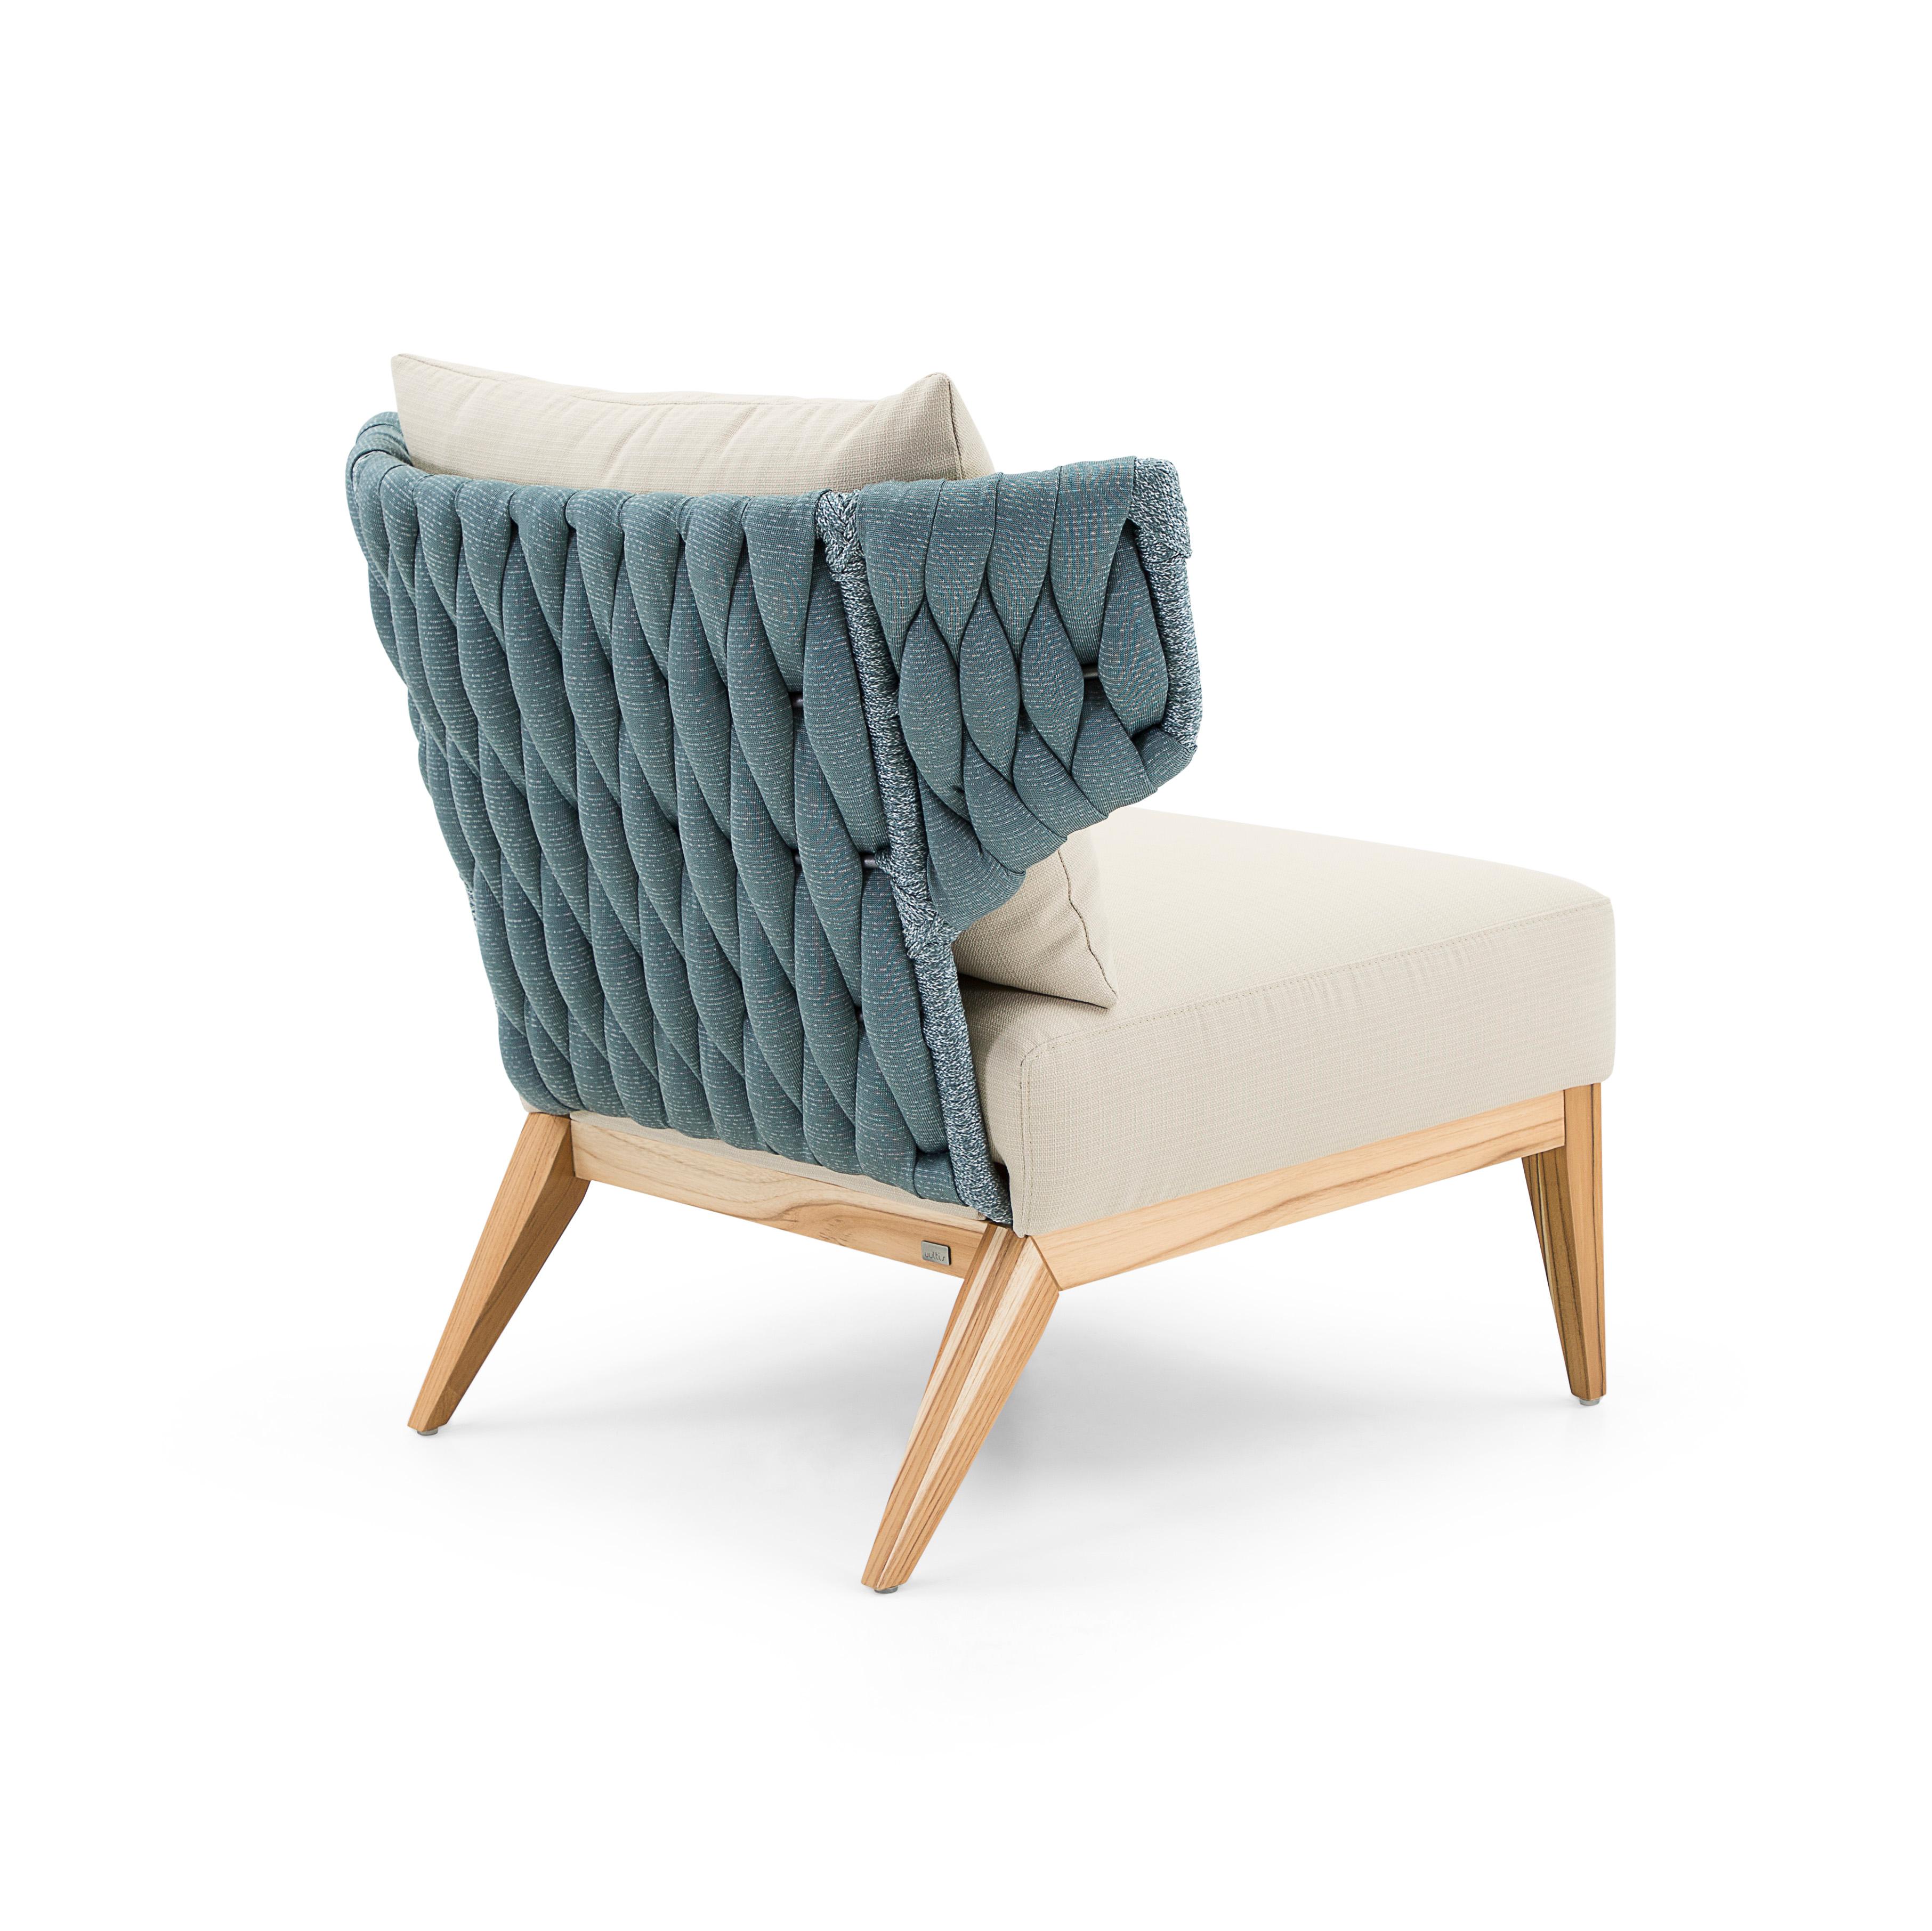 Beluga Outdoor Armchair in Beige and Blue fabric and Teak wood In New Condition For Sale In Miami, FL